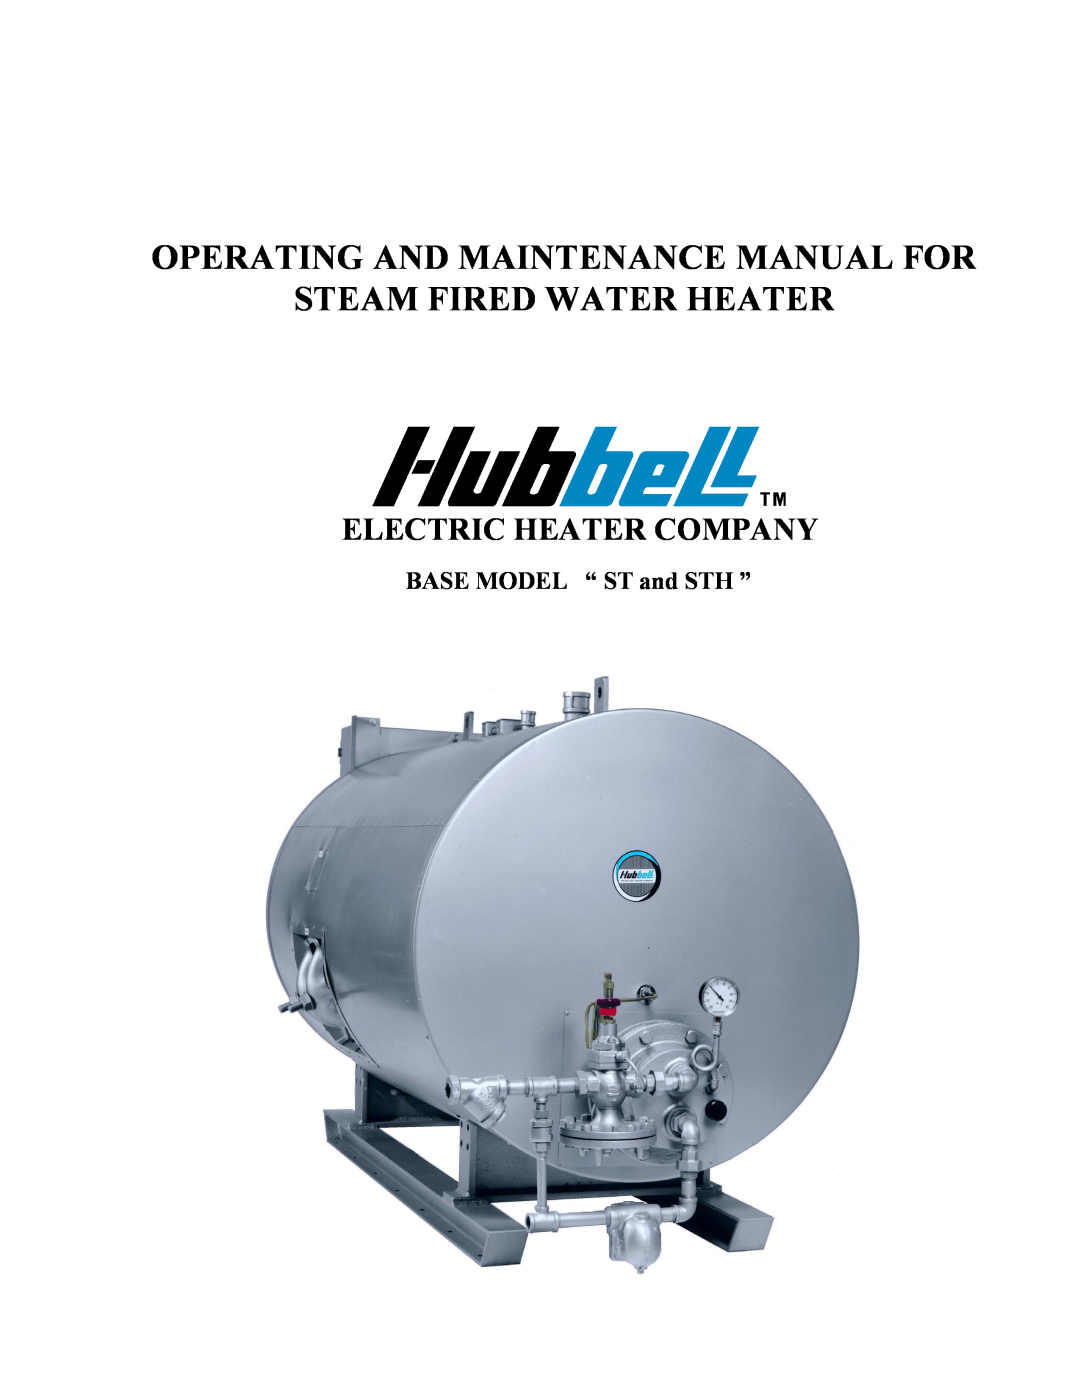 Hubbell manual BASE MODEL “ ST and STH ”, Operating And Maintenance Manual For, Steam Fired Water Heater 